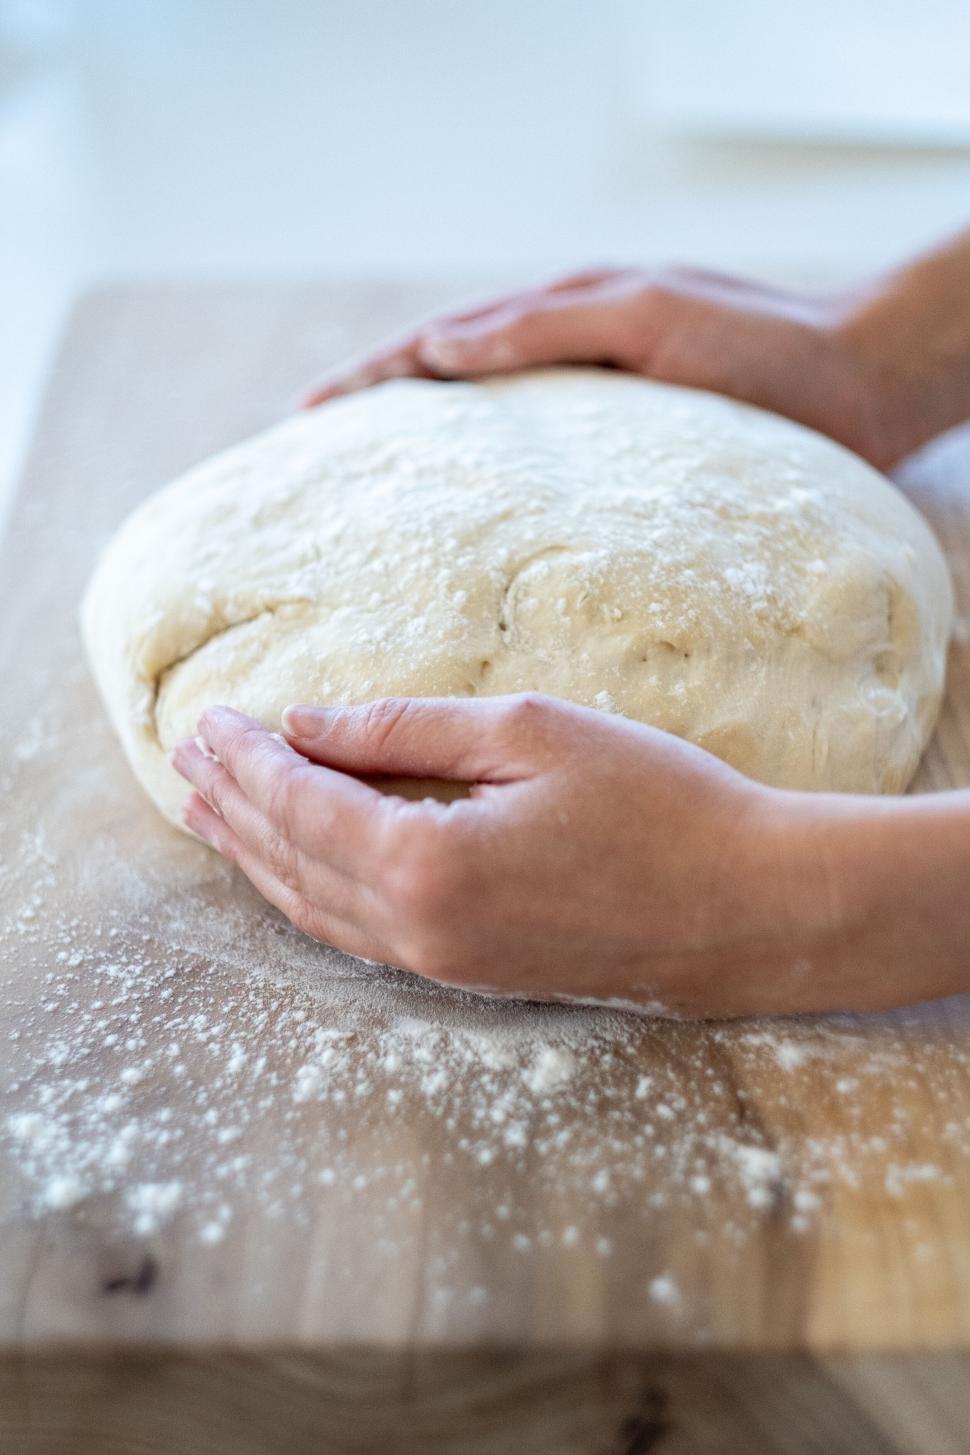 Free Image of Hands shaping a fresh loaf of bread on a cutting board 